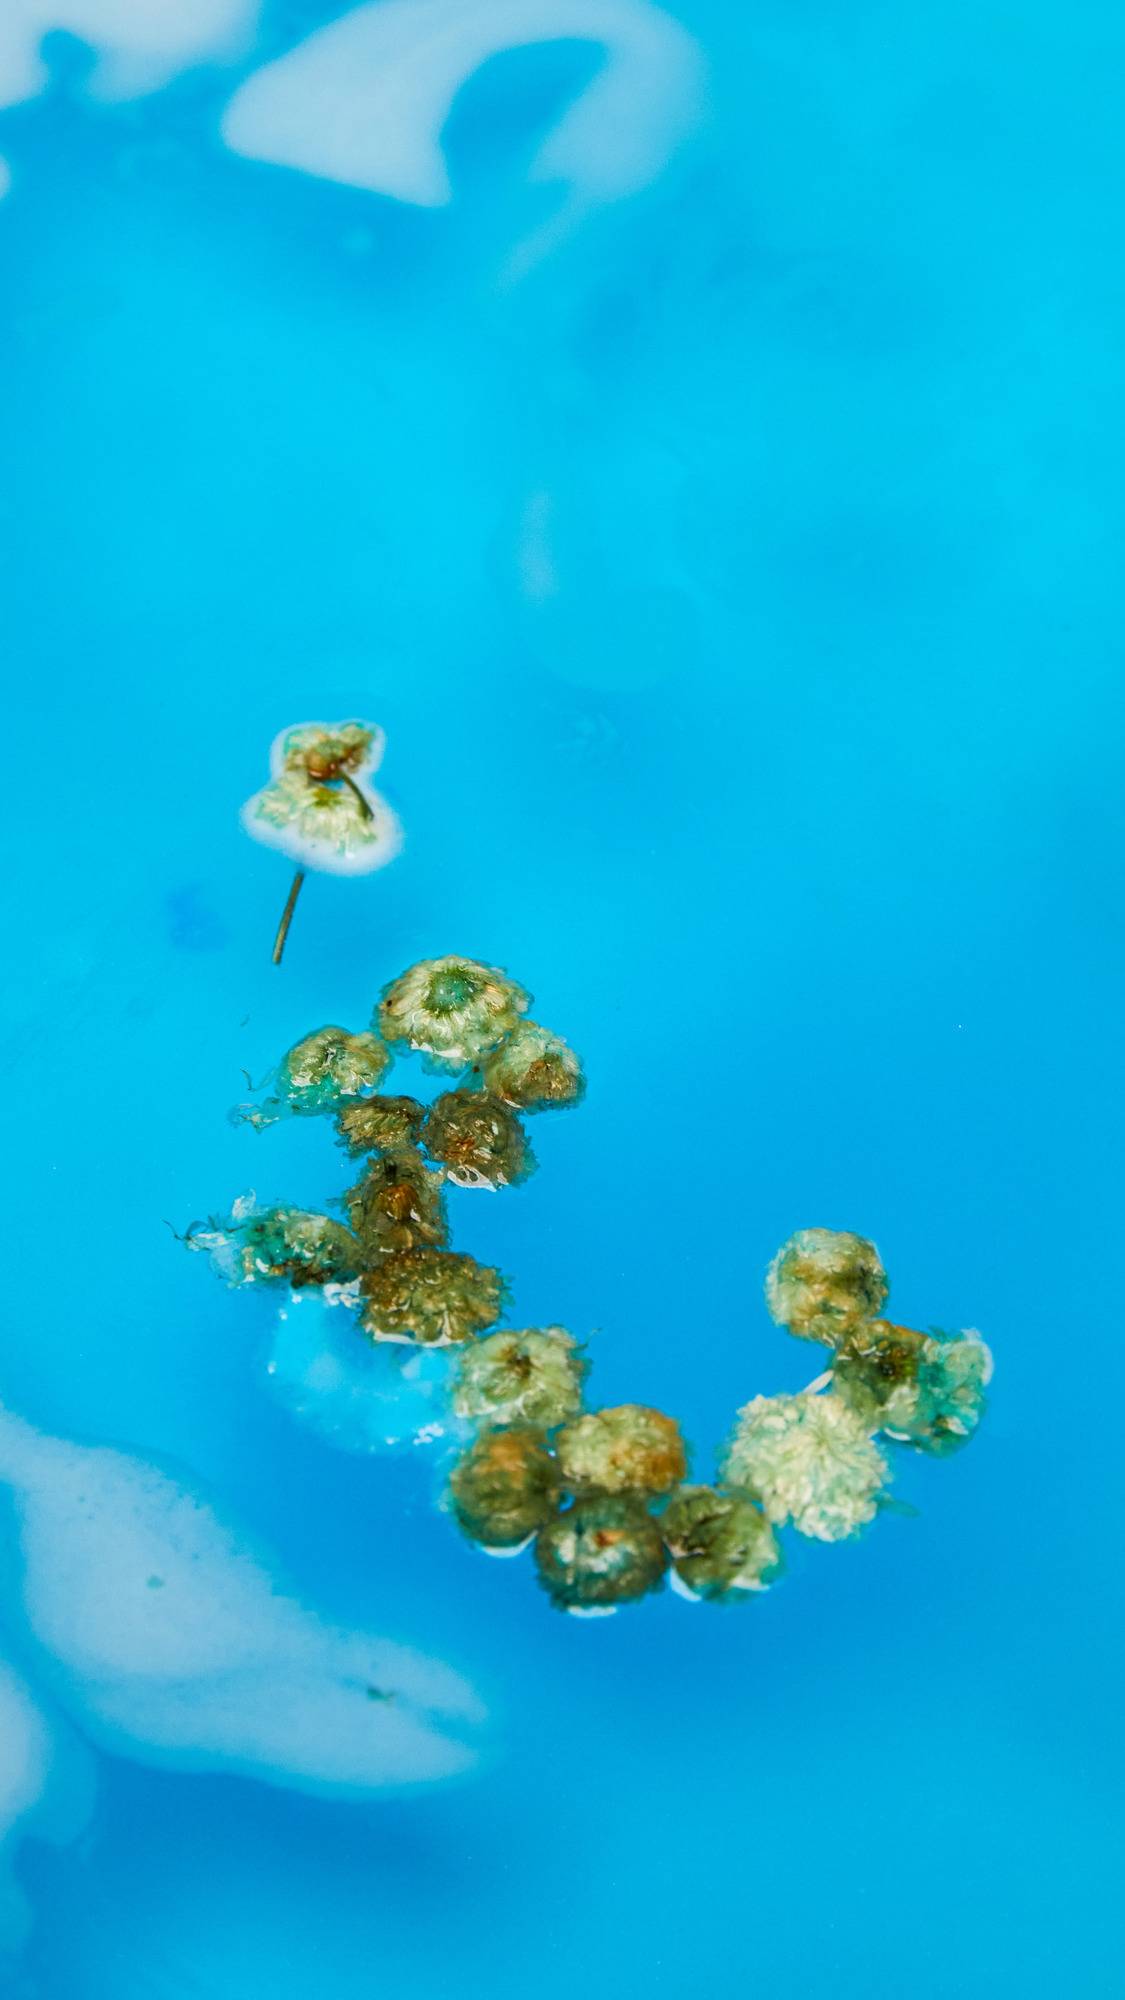 The One With Chamomile bath bomb has completely dissolved leaving behind a sea of deep blue swirls and a handful of dried chamomile flowers floating on top of the water. 